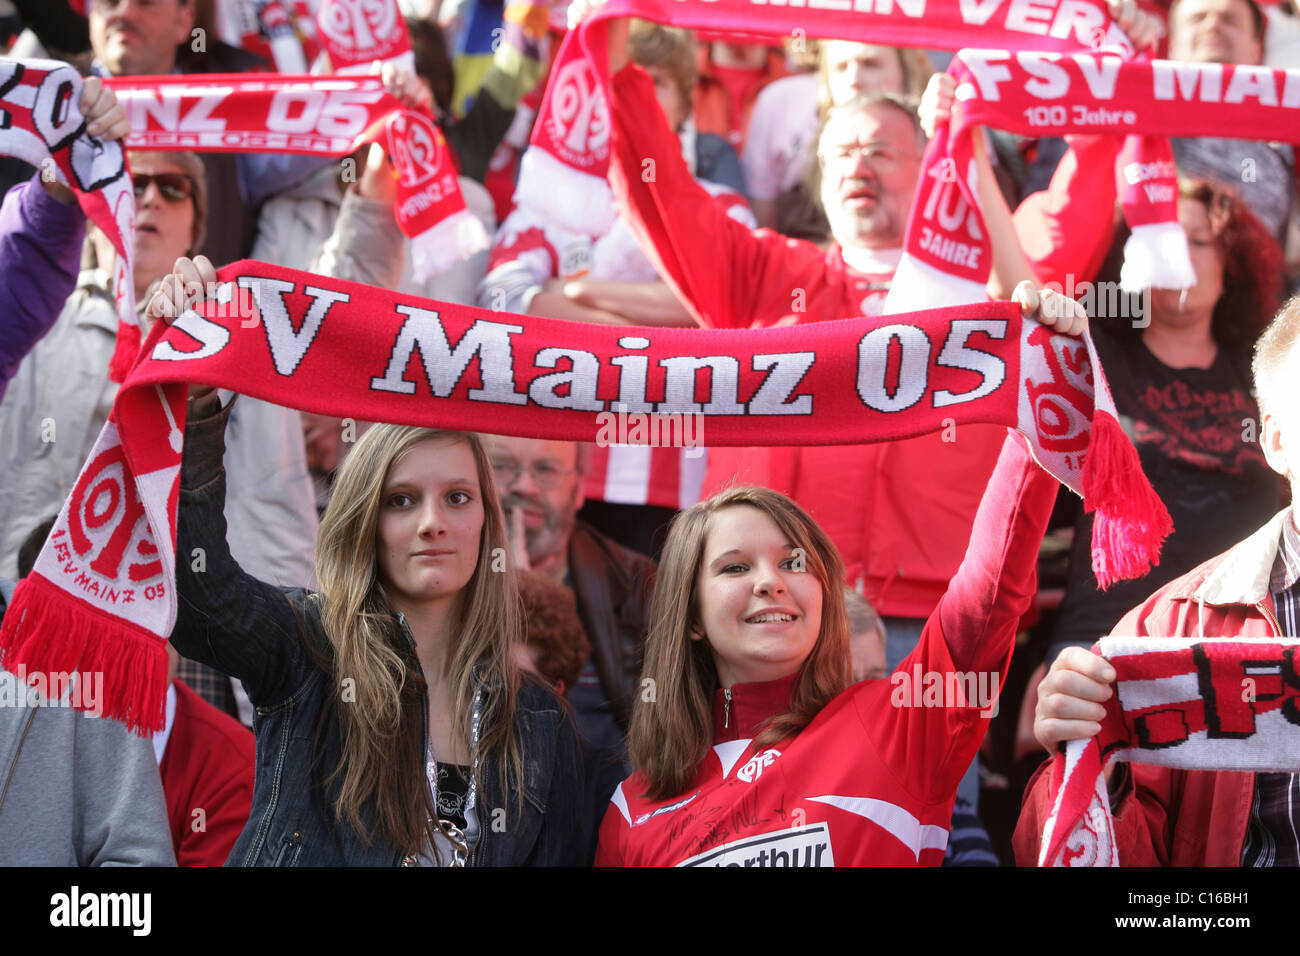 Fans of FSV Mainz 05 showing their team scarves Stock Photo